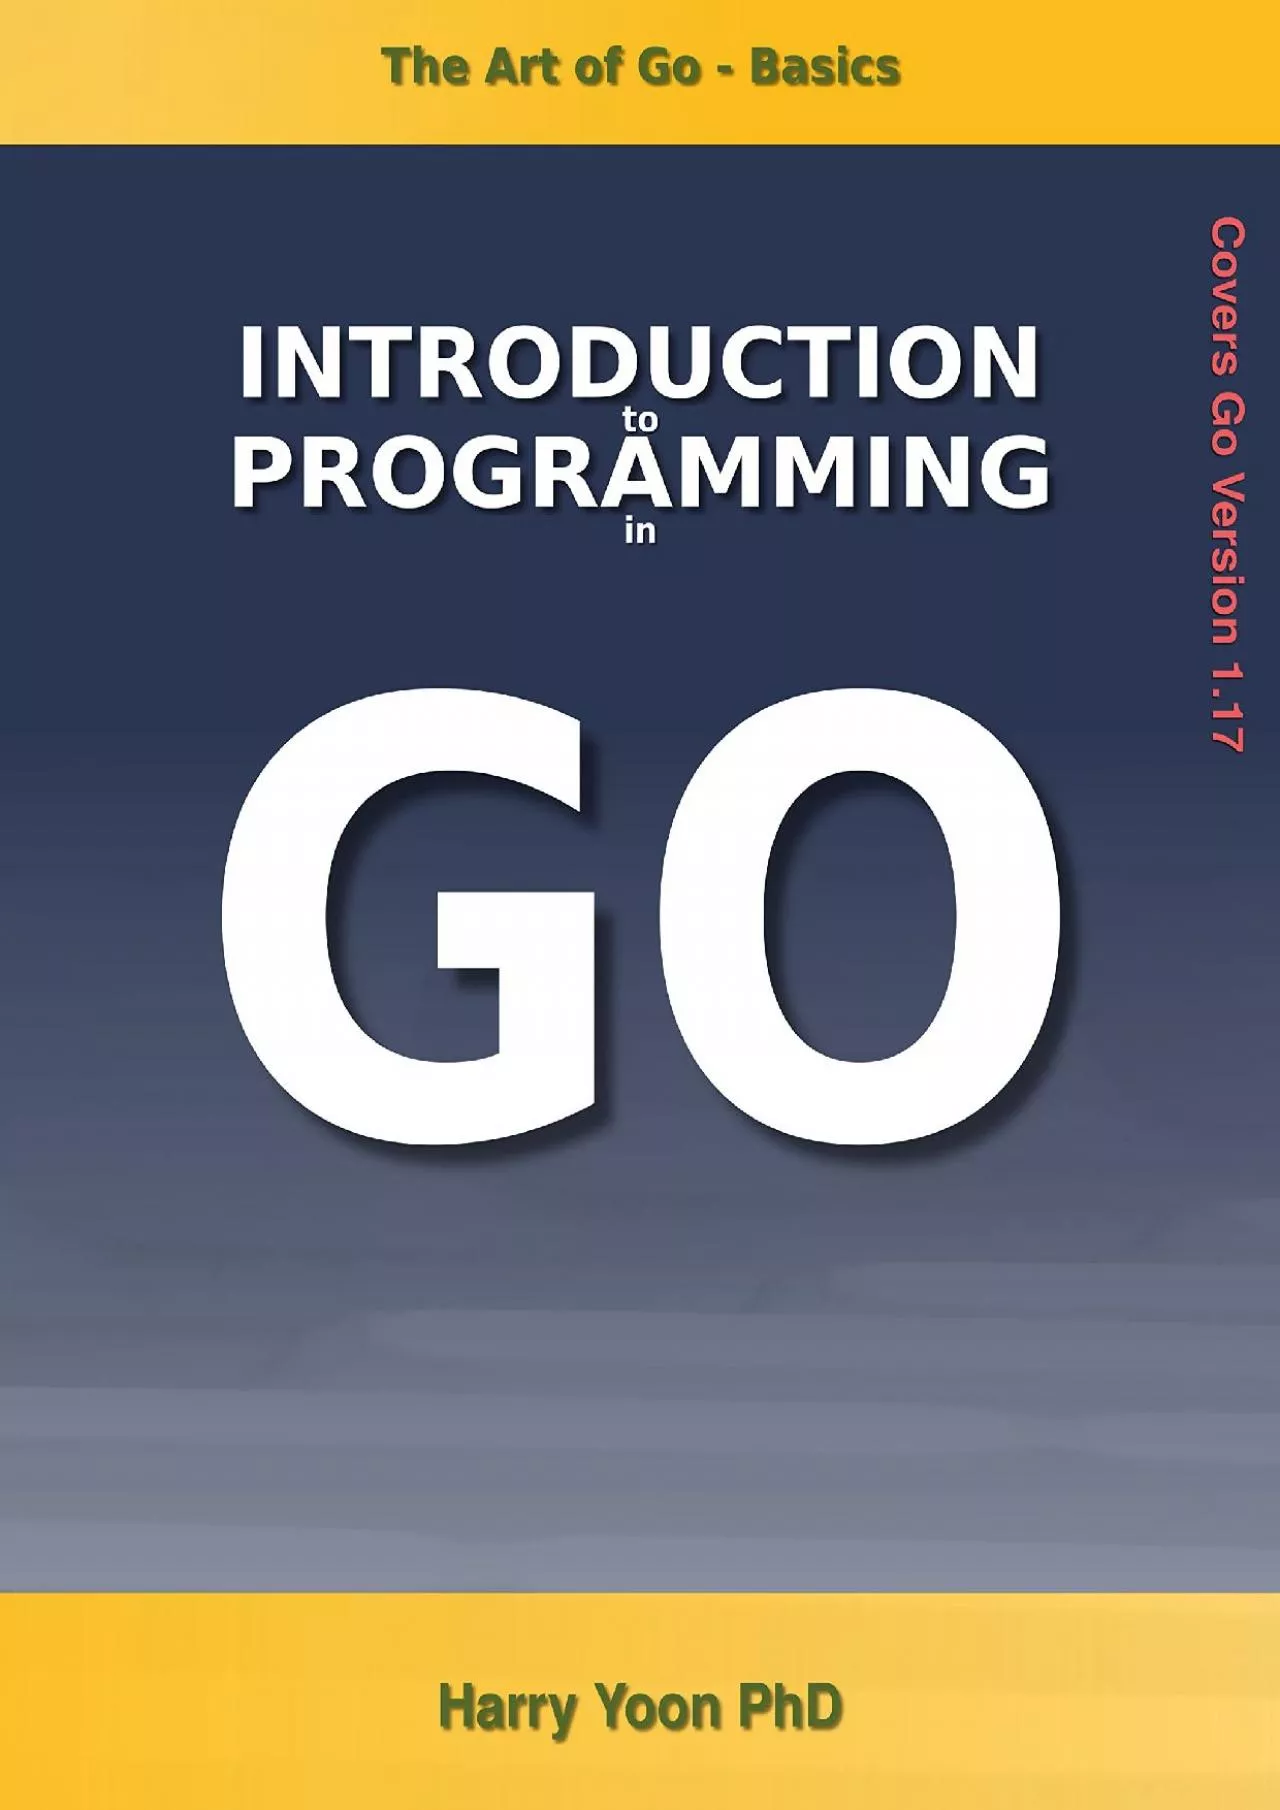 [eBOOK]-The Art of Go - Basics: Introduction to Programming in Golang - Beginner to Intermediate